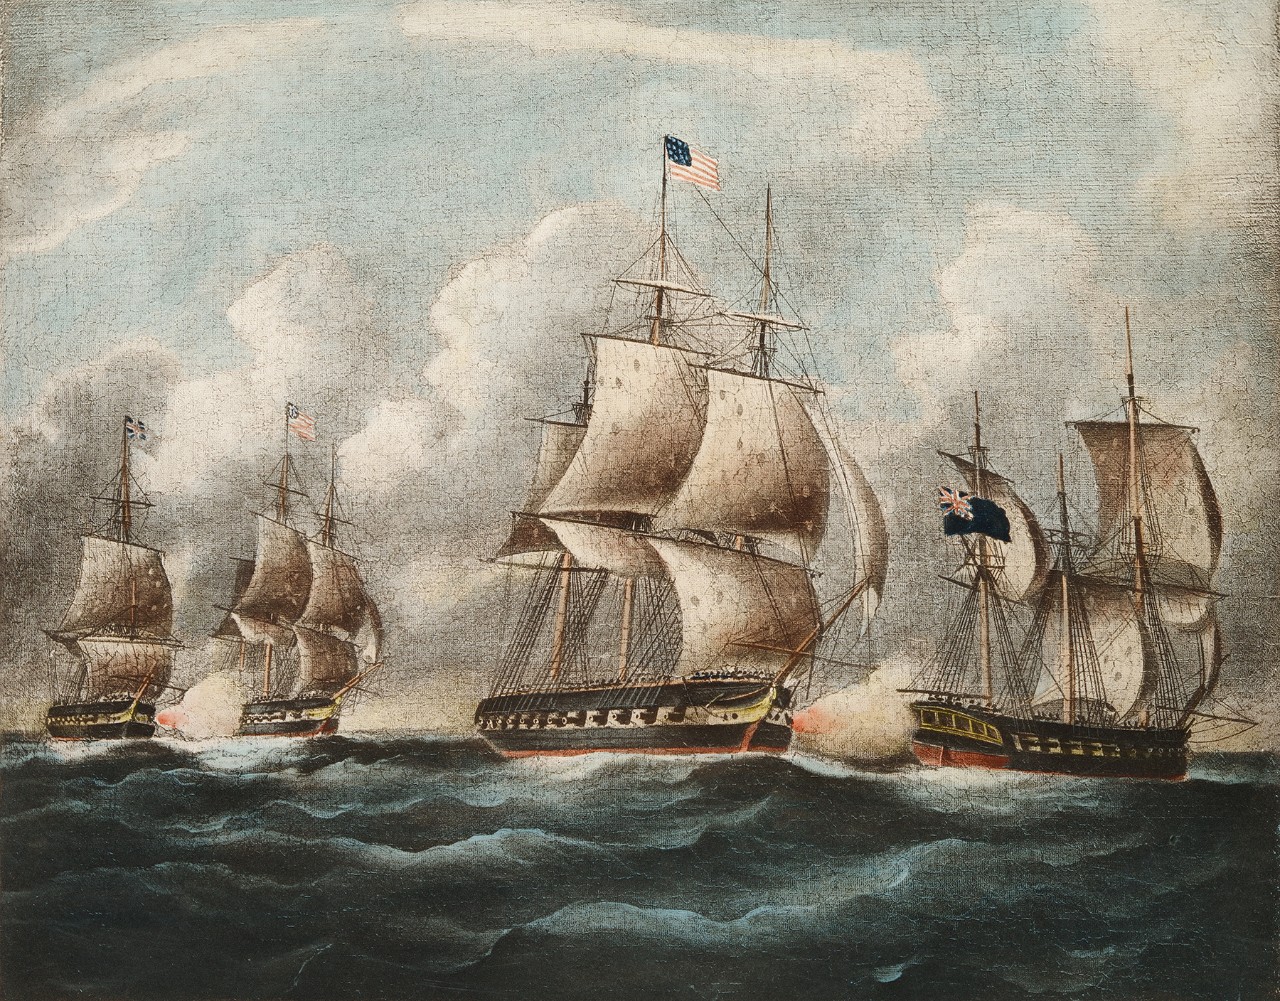 There are two ships in the foreground engage in battle with two others in the background firing at each other